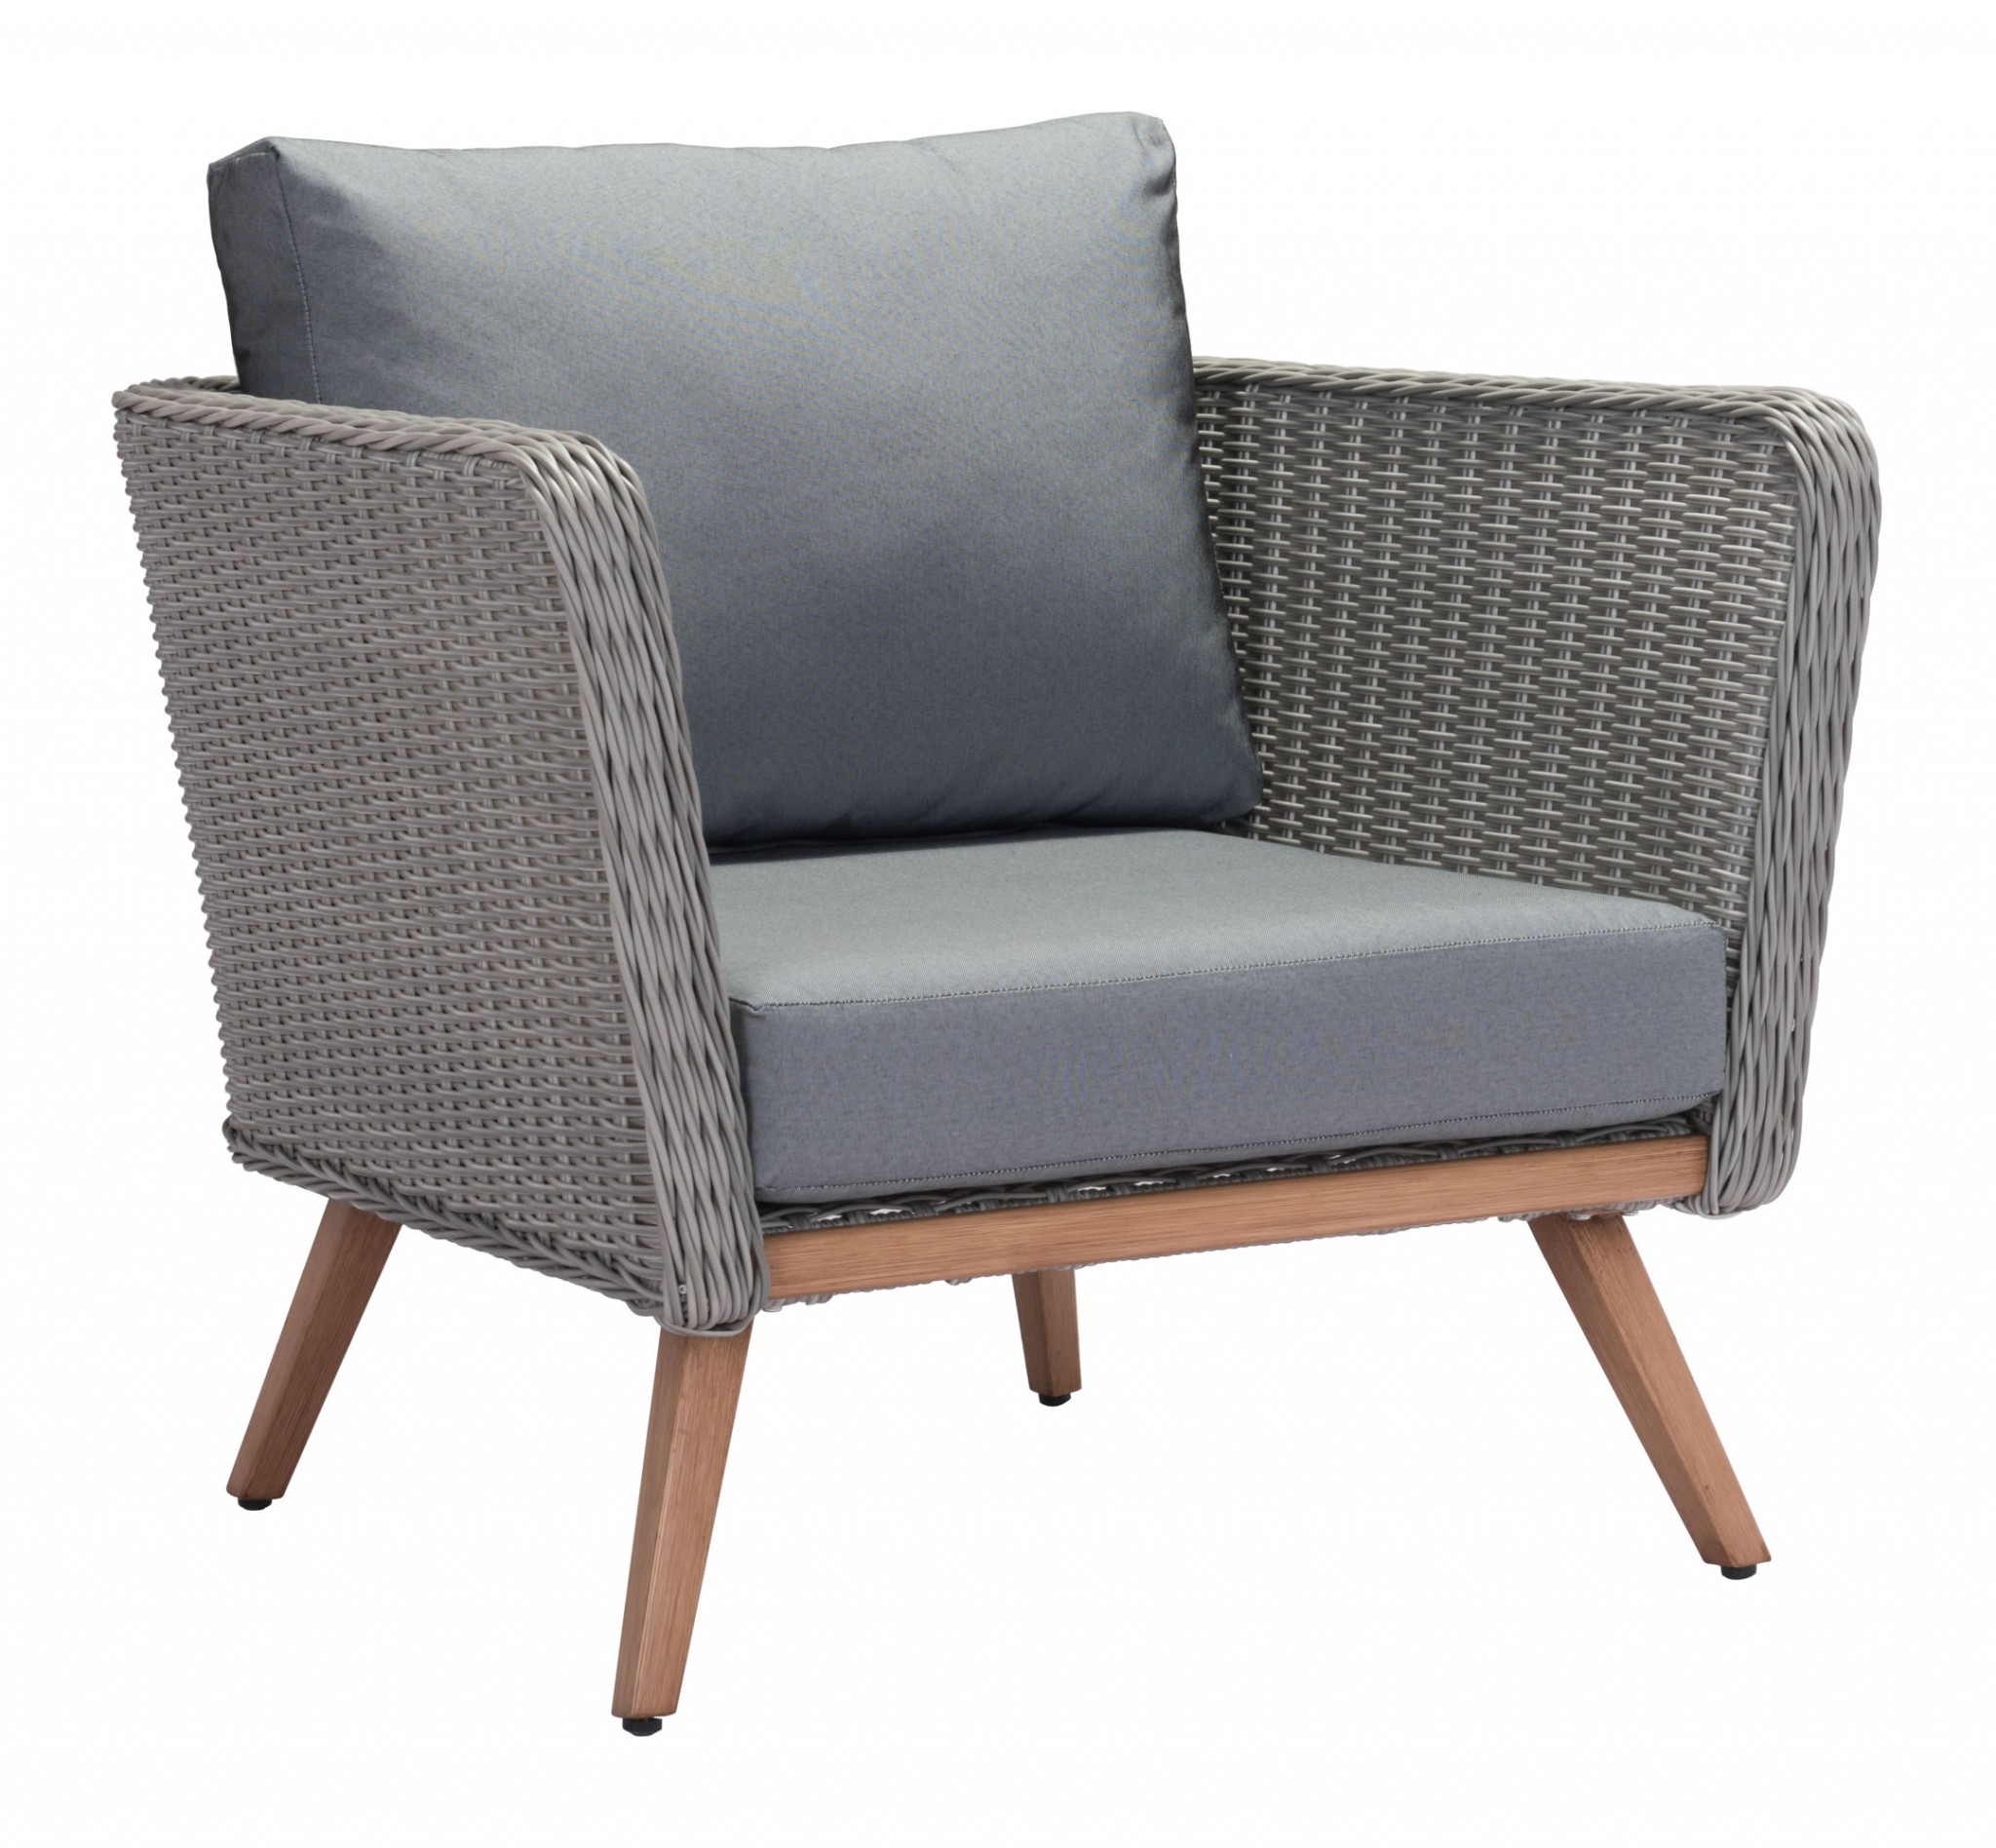 35.4" x 30.3" x 33.9" Natural & Gray, Synthetic Weave & Aluminium, Arm Chair